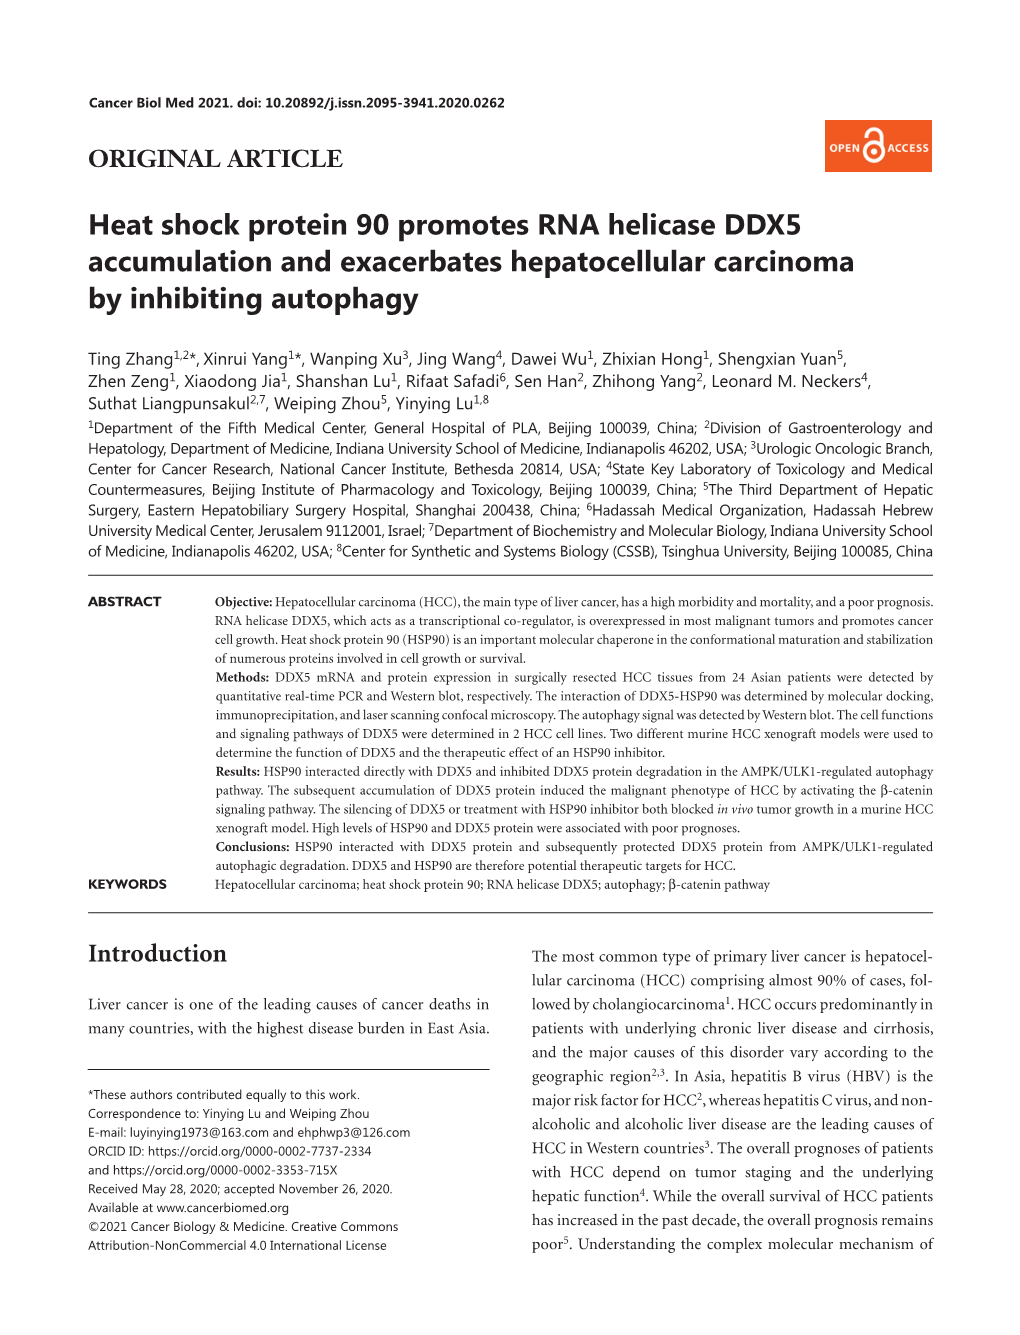 Heat Shock Protein 90 Promotes RNA Helicase DDX5 Accumulation and Exacerbates Hepatocellular Carcinoma by Inhibiting Autophagy